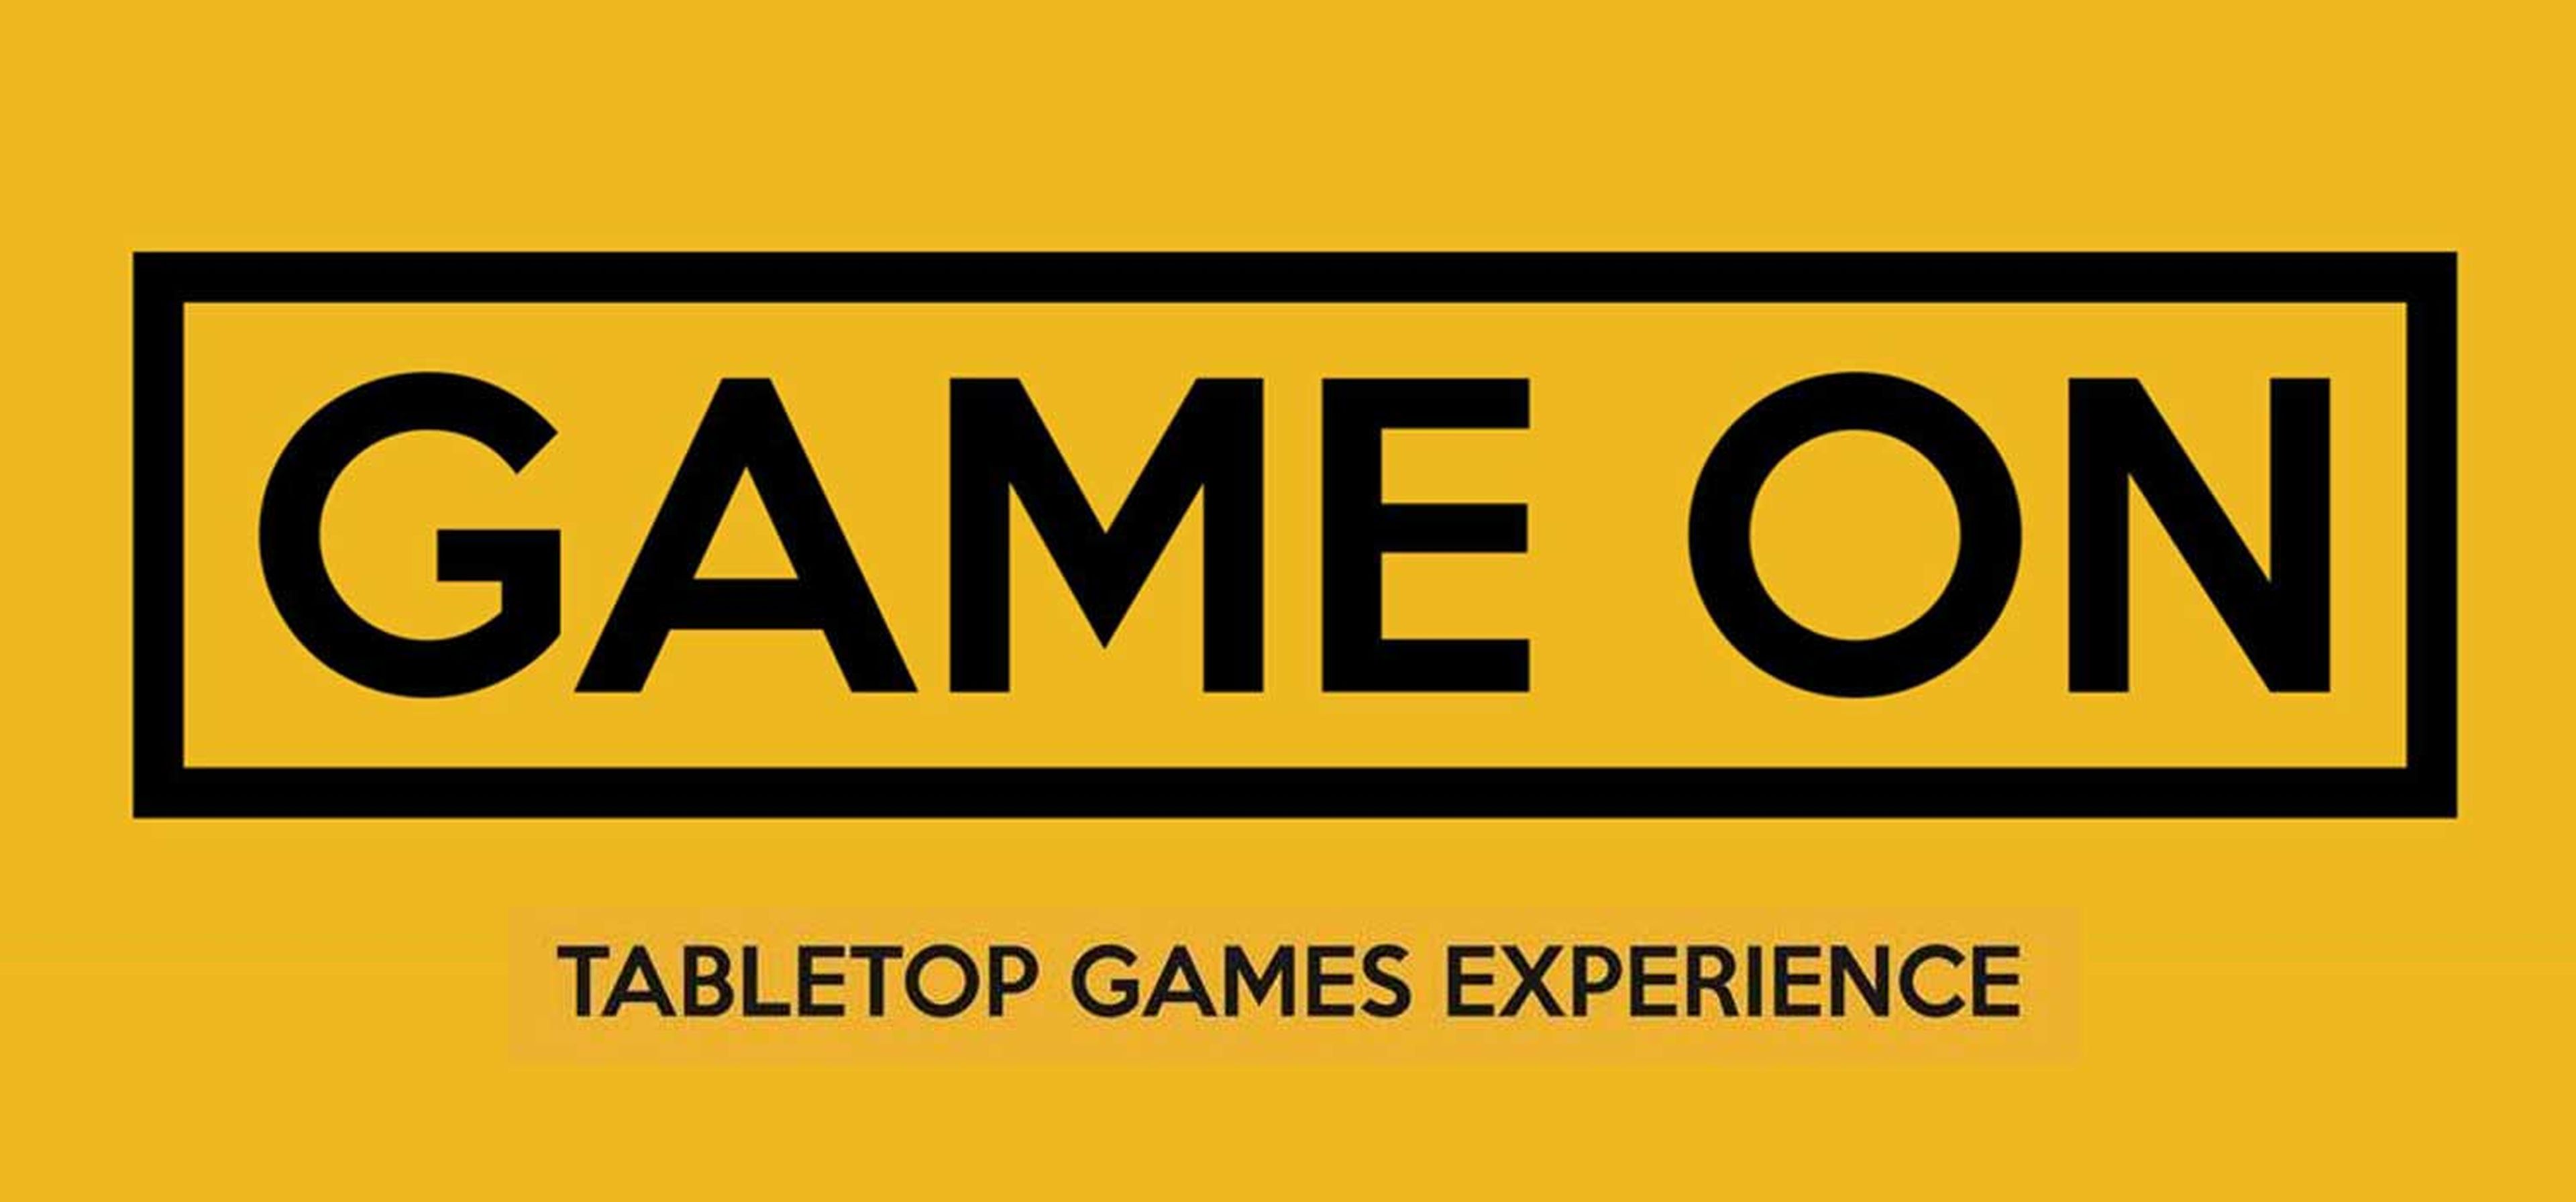 Game On: Tabletop Games Experience